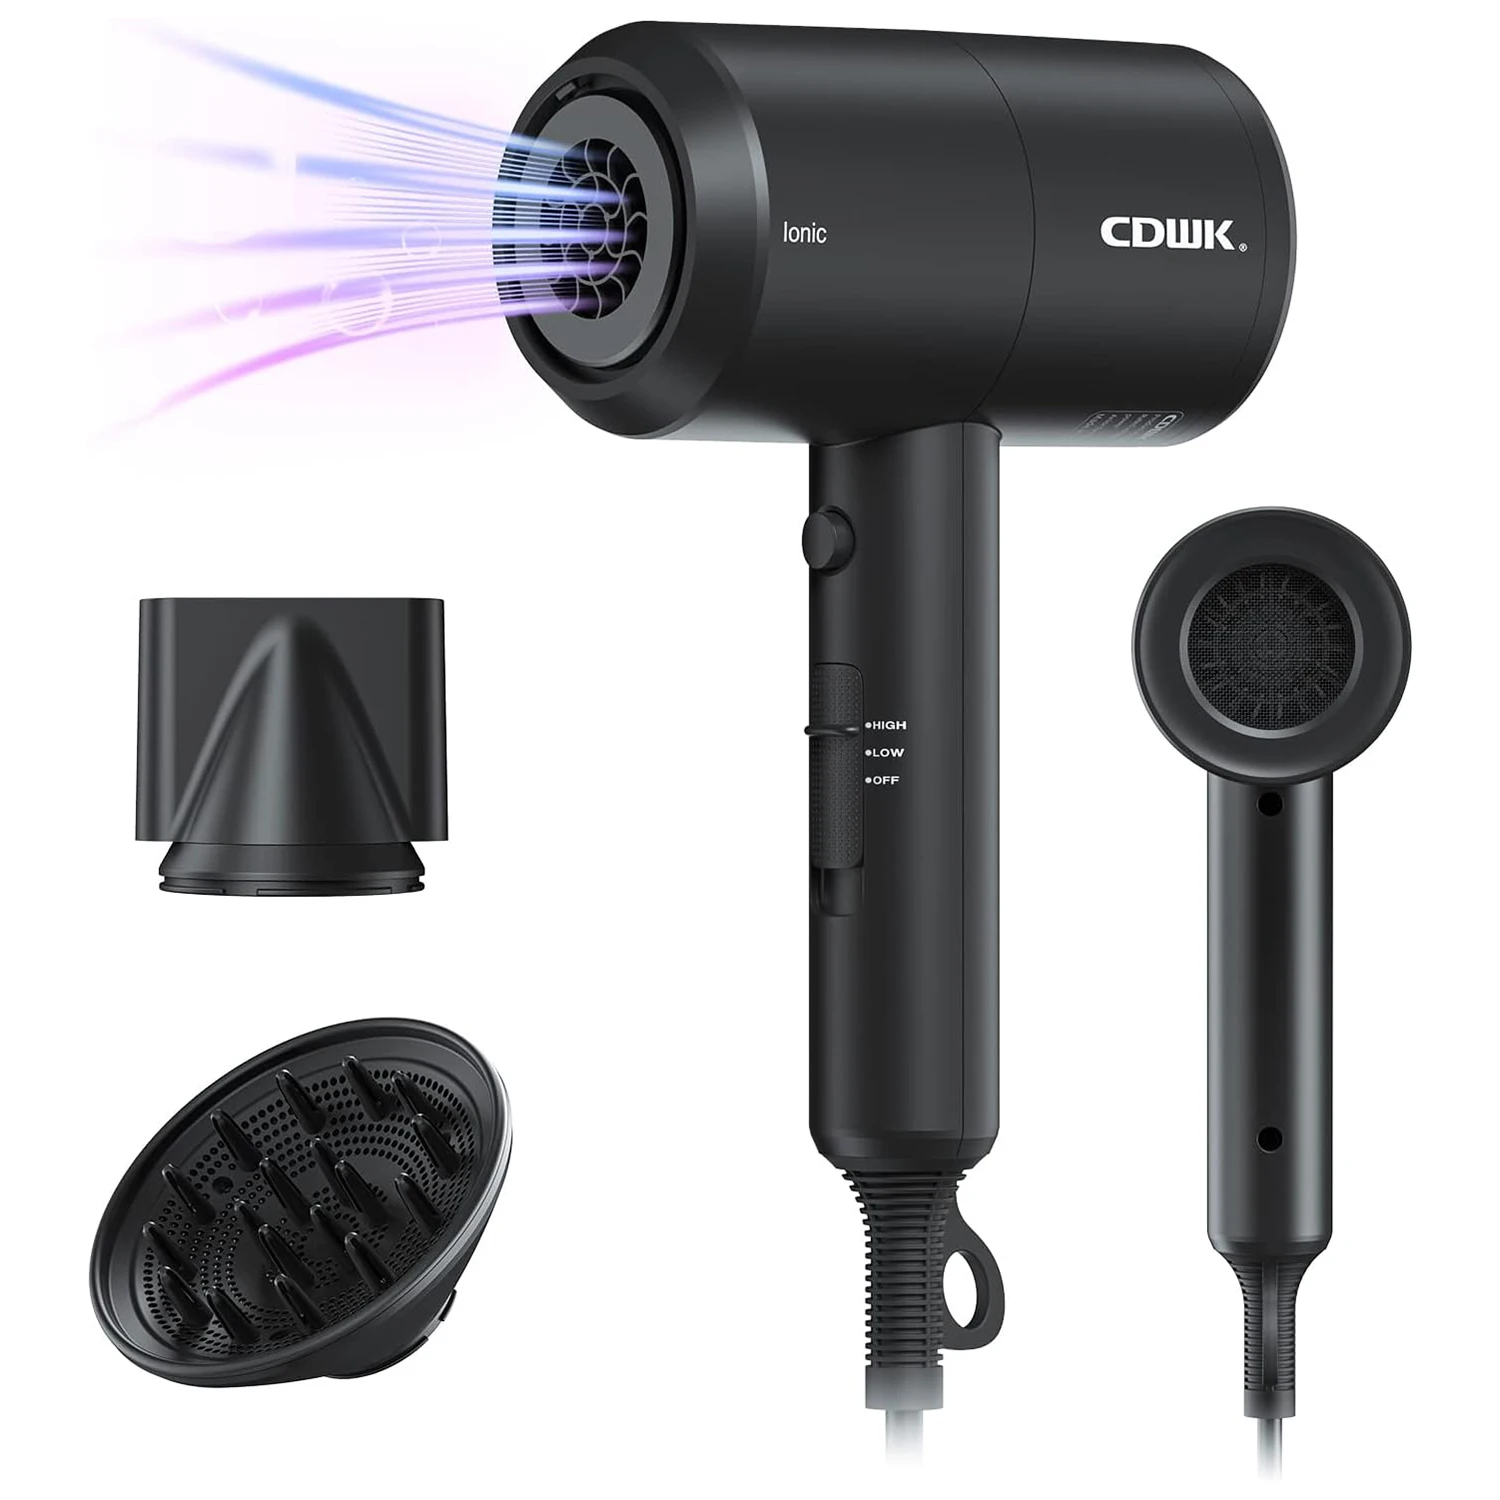 Professional Ionic Negative Hair Dryer with Diffuser 1800W Fast Drying Hair Dryers for Curly Straight Hair Travel Portable